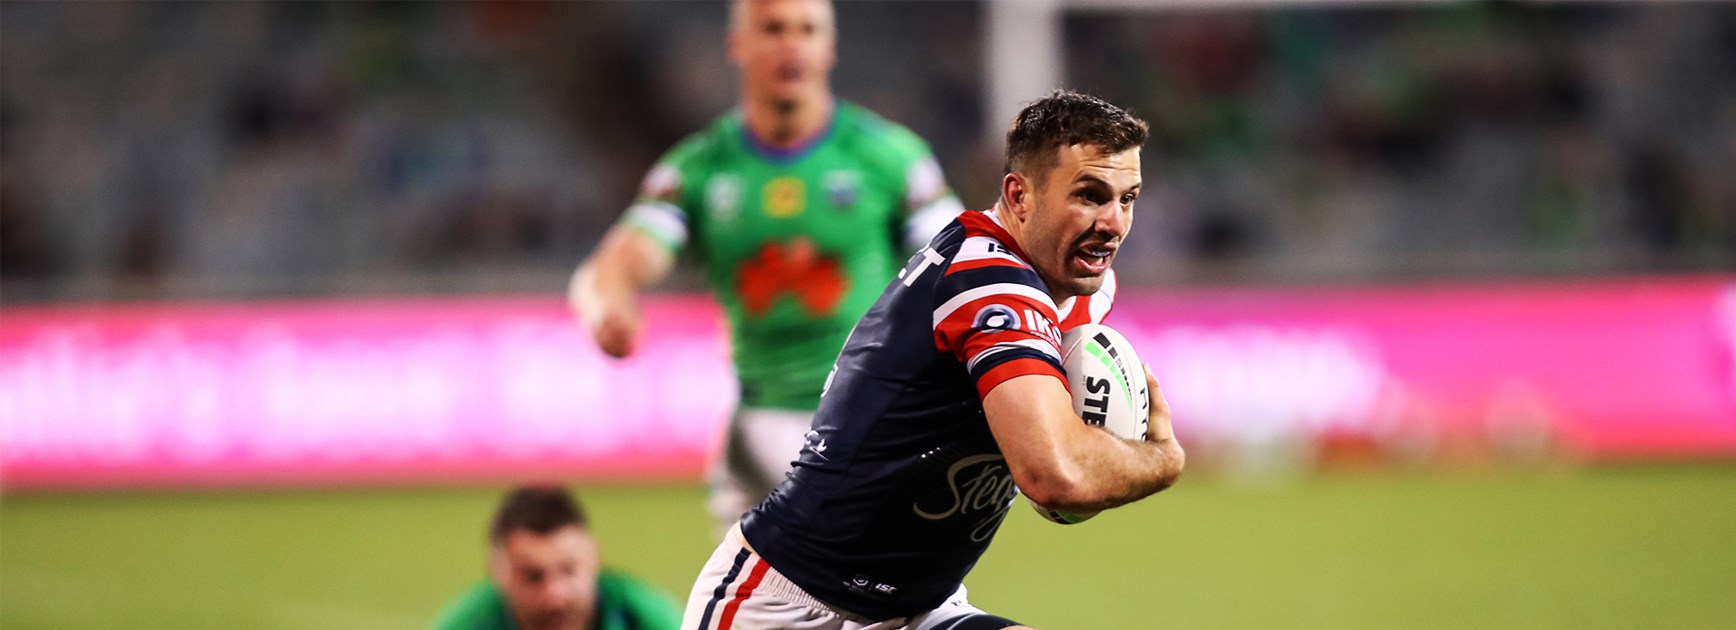 Roosters trial match confirmed for February